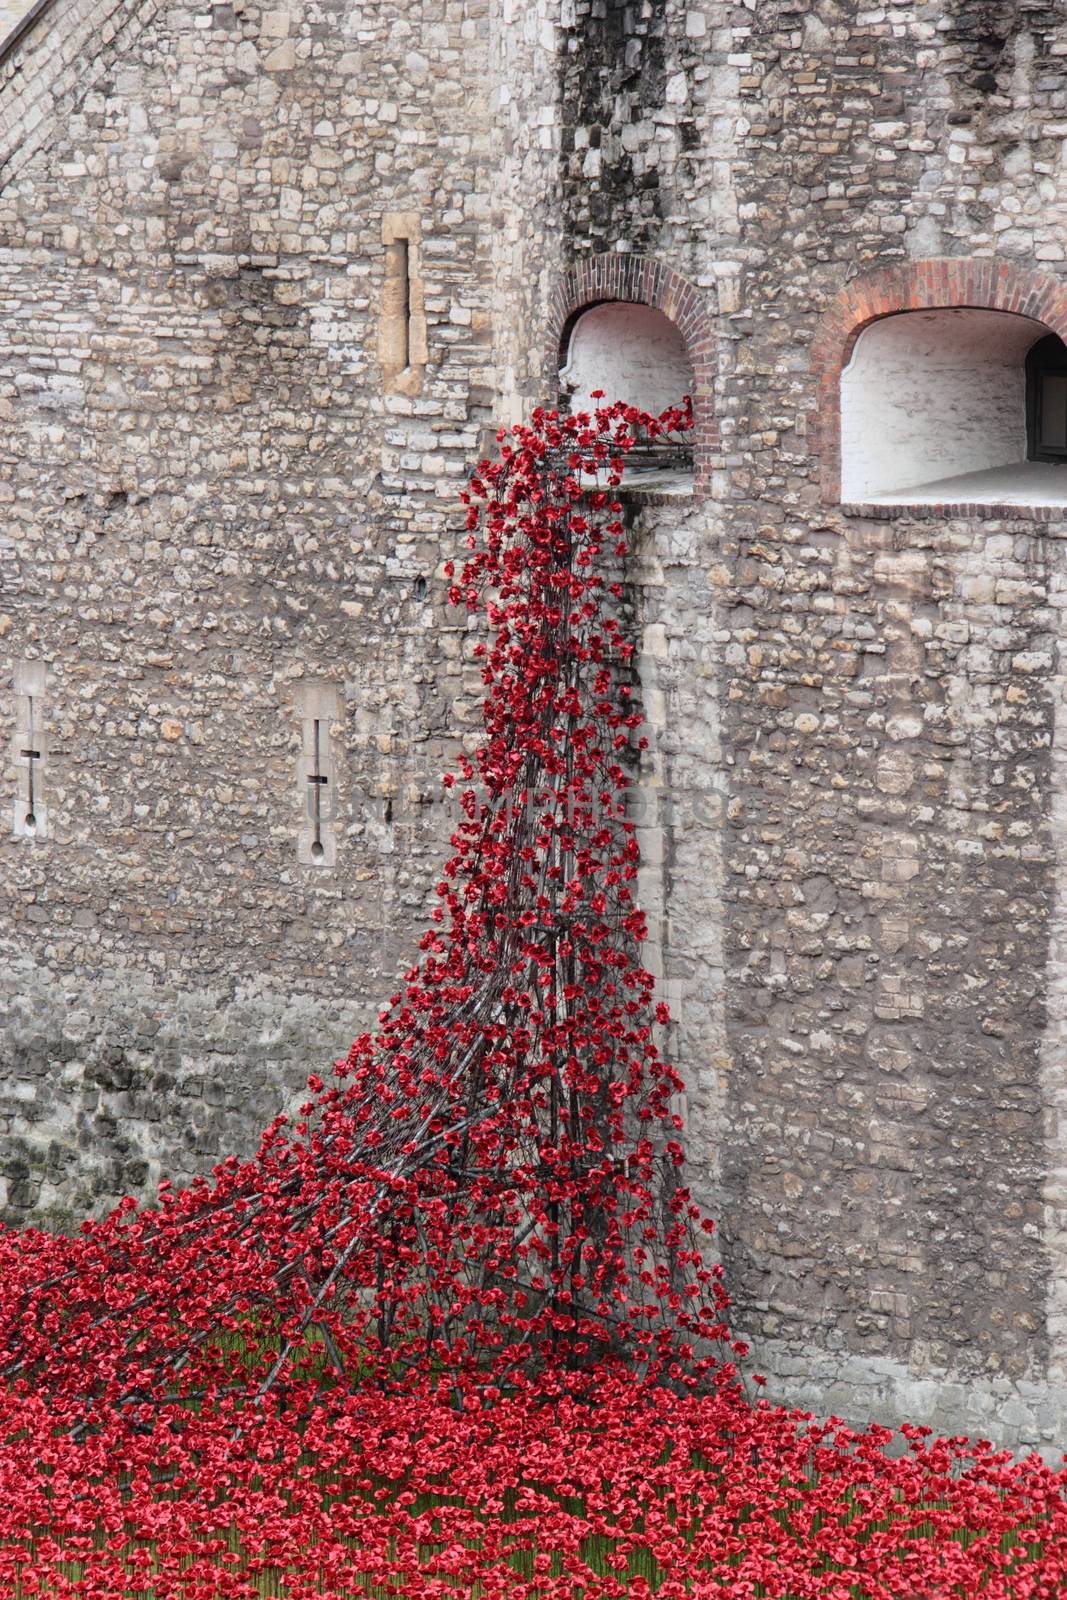 Poppies at The Tower of London London UK by mitzy